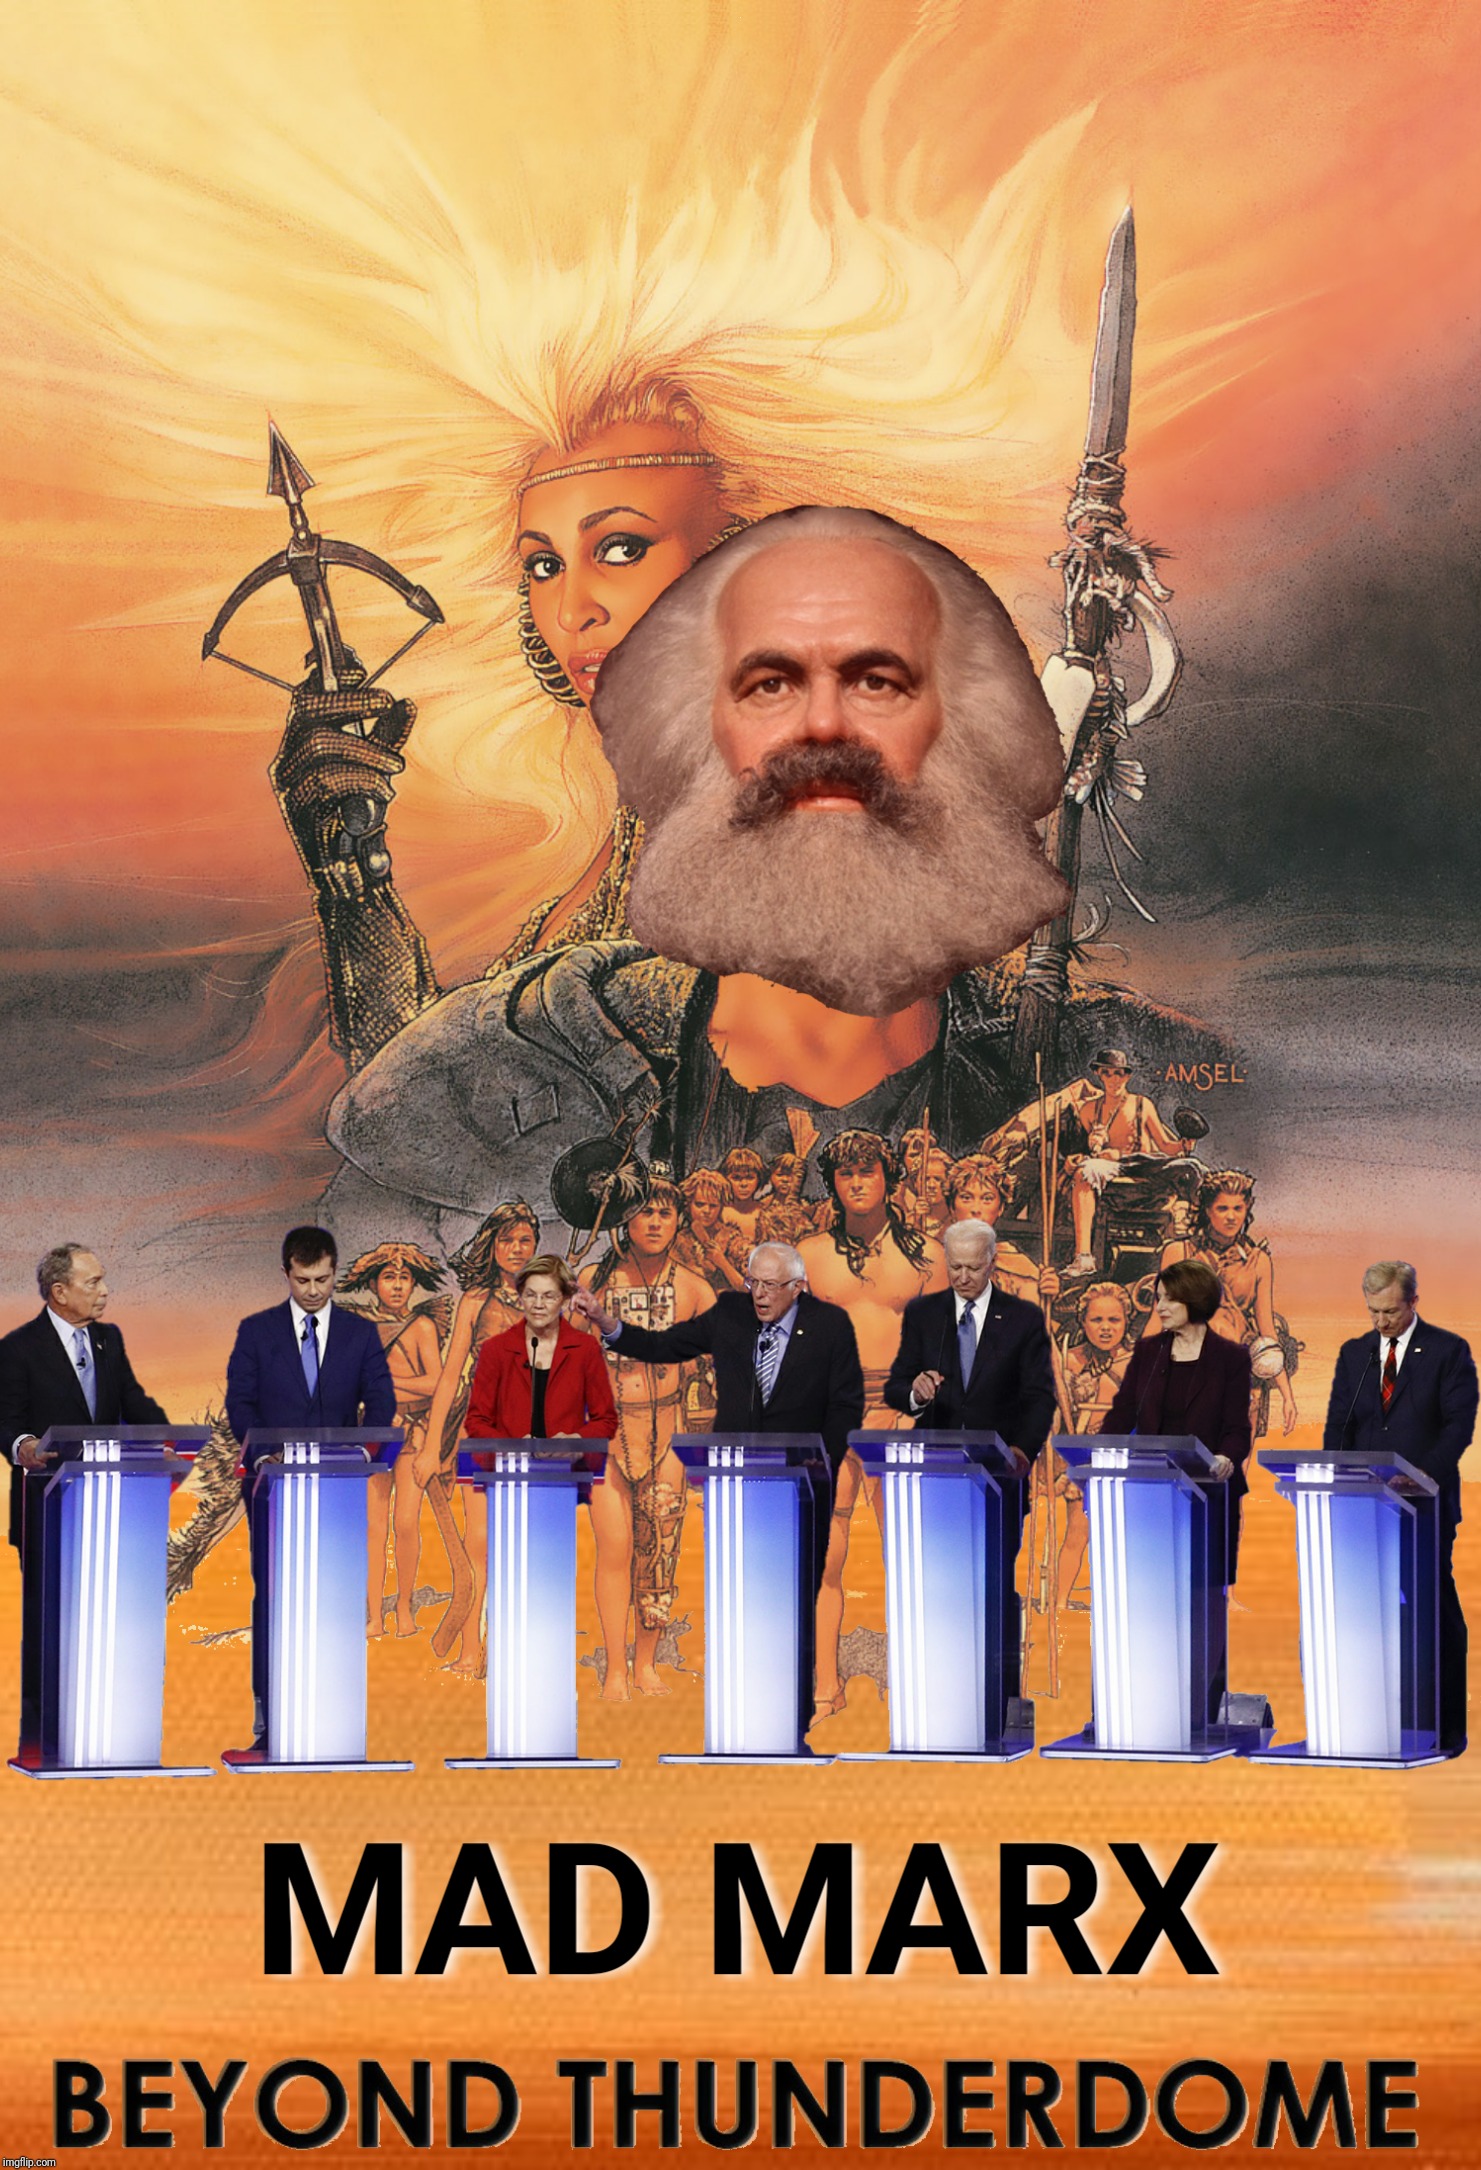 Bad Photoshop Sunday presents:  Seven candidates enter, no candidates leave | M | image tagged in bad photoshop sunday,mad max,karl marx,beyond thunderdome | made w/ Imgflip meme maker